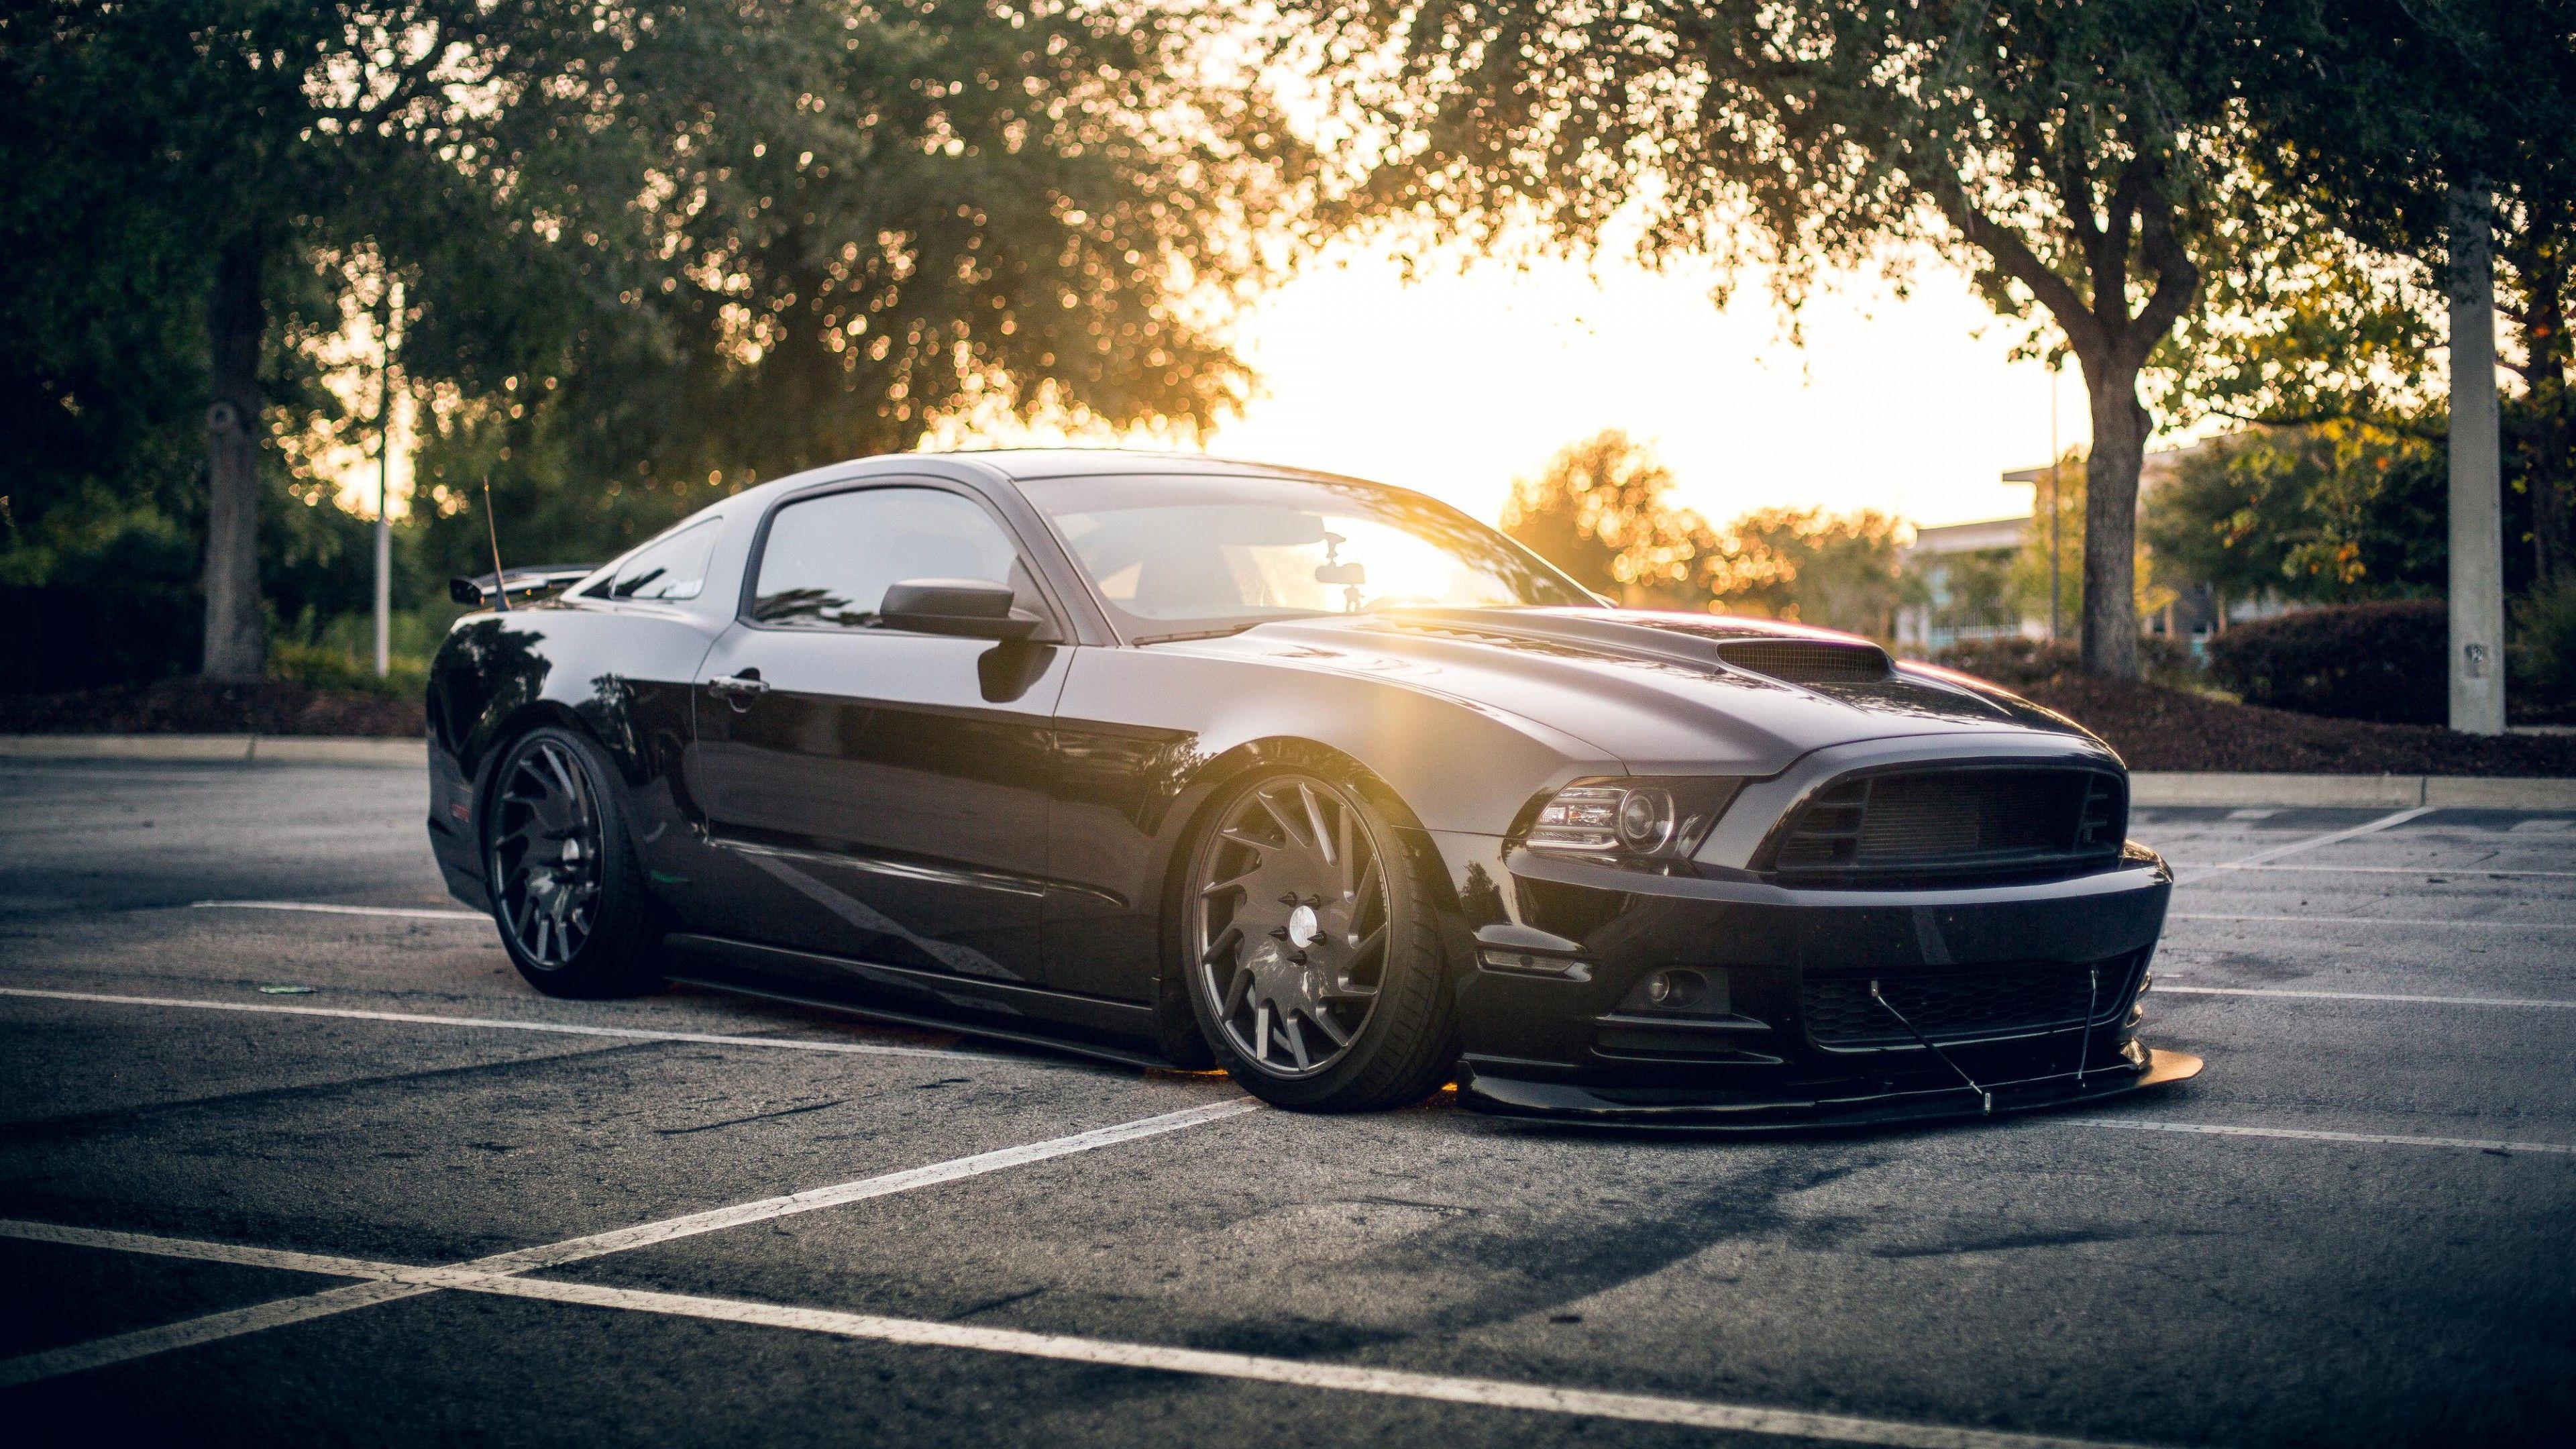 Mustang 4k Wallpapers For Your Desktop Or Mobile Screen Free And Easy To Download